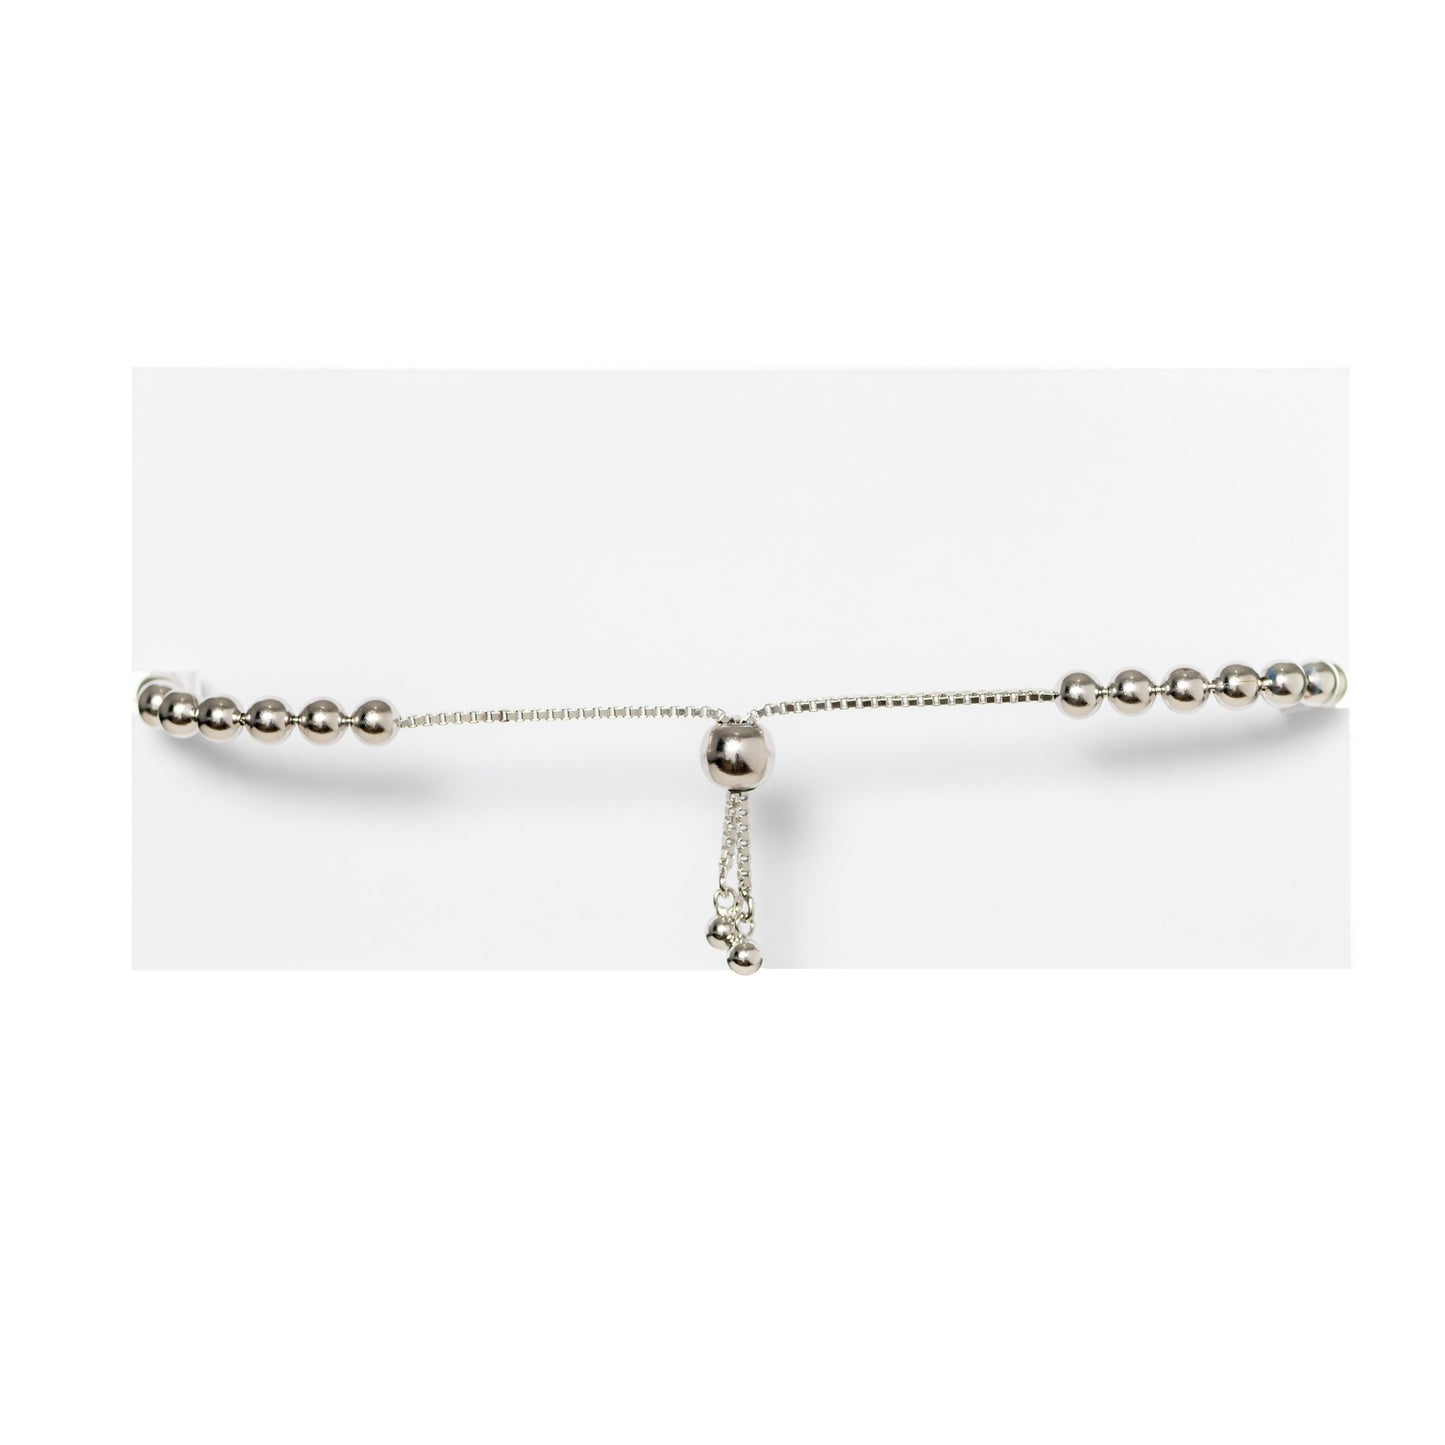 back side cord clasp of silver be kind ball chain bracelet 